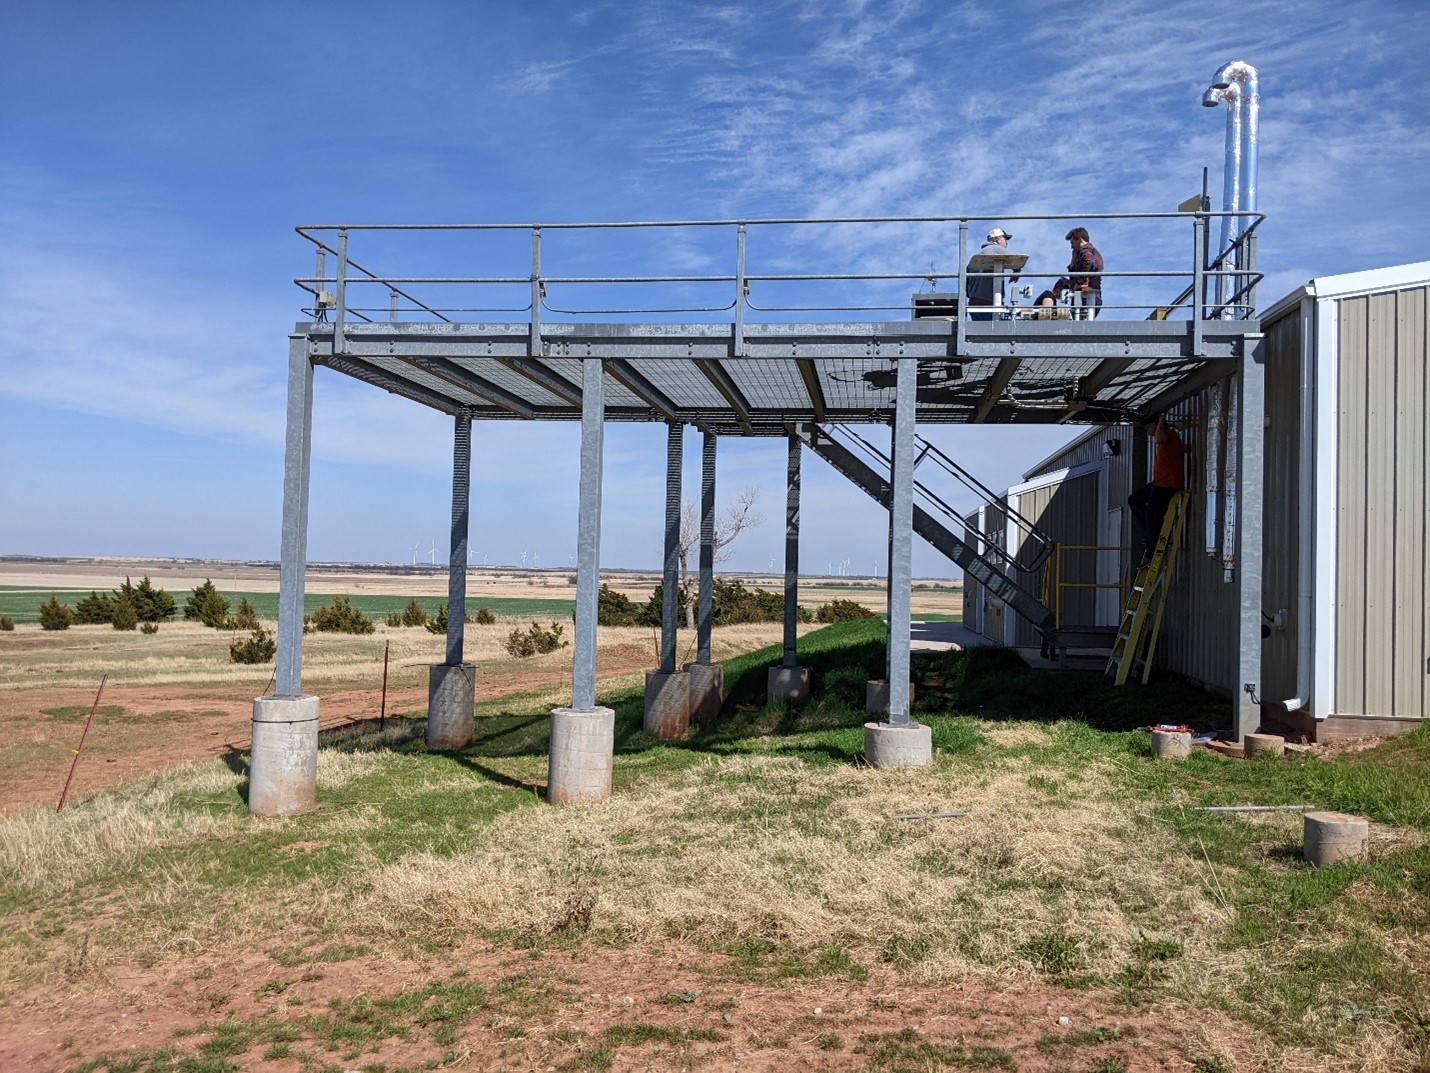 Two people talk on top of a platform at the Southern Great Plains atmospheric observatory in Oklahoma.